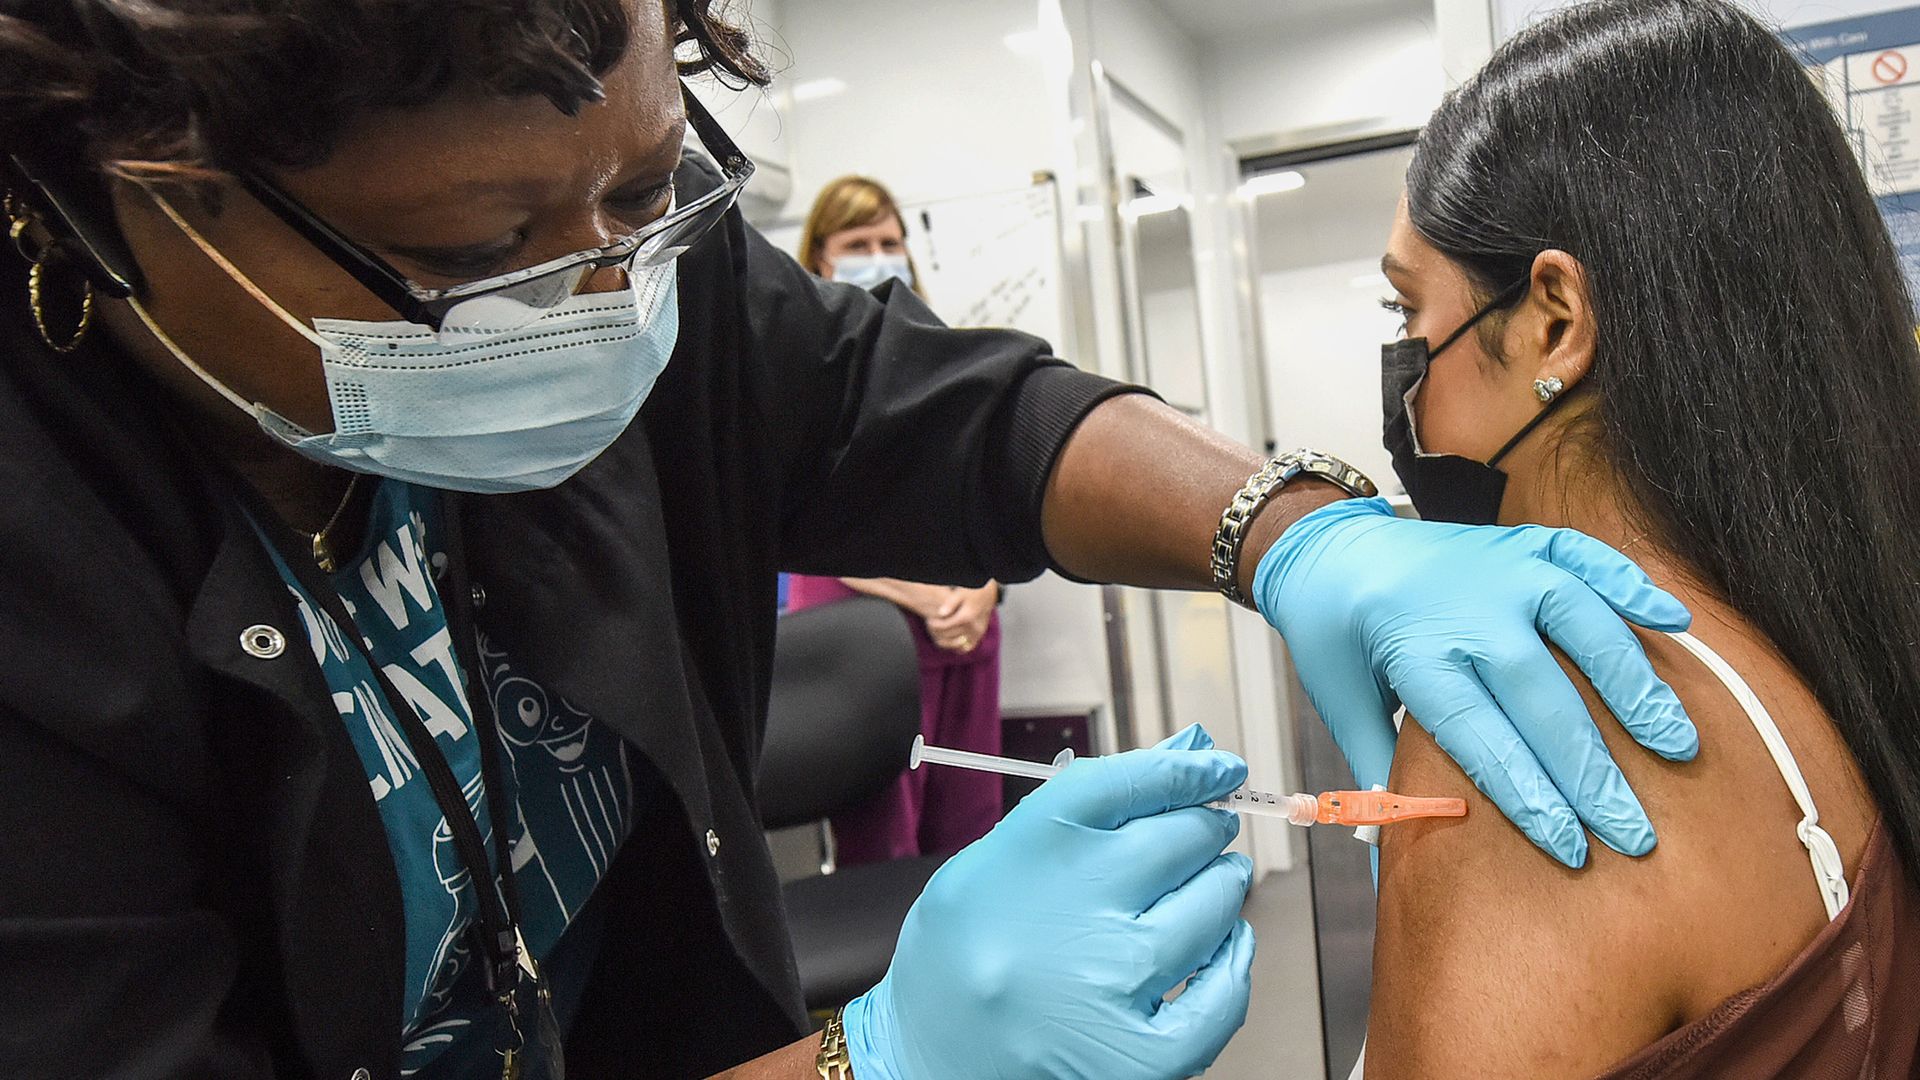 Nurse Carlene Fleming administers a dose of COVID-19 vaccine to a patient at a mobile vaccination event at the downtown Orlando campus of the University of Central Florida and Valencia College.